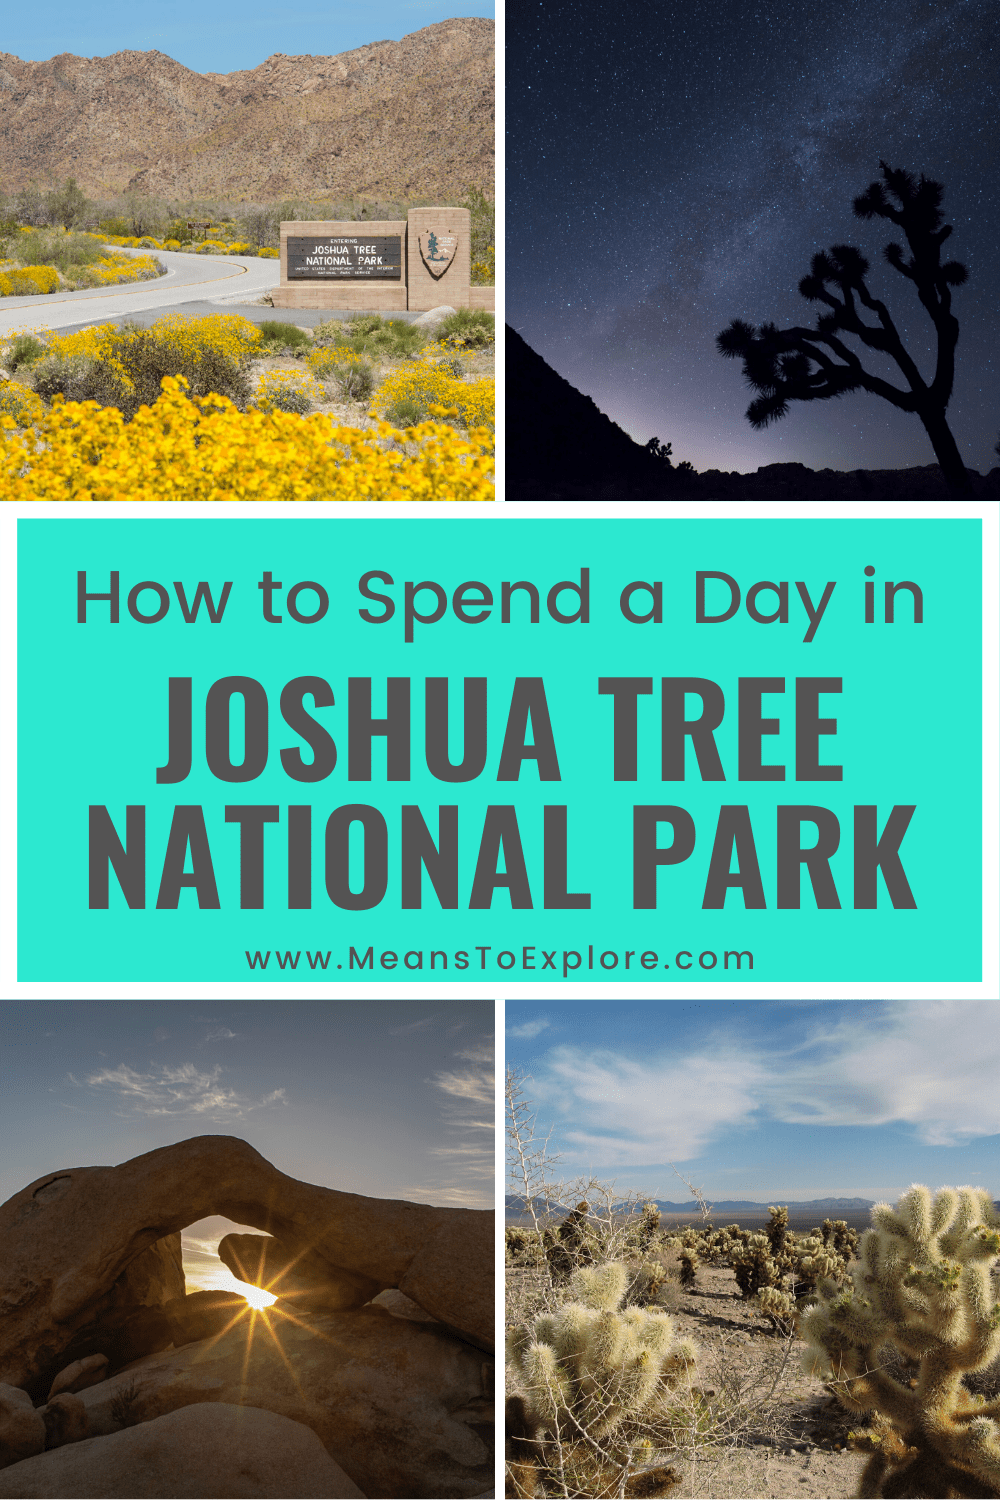 How to Have an Epic Day at Joshua Tree National Park